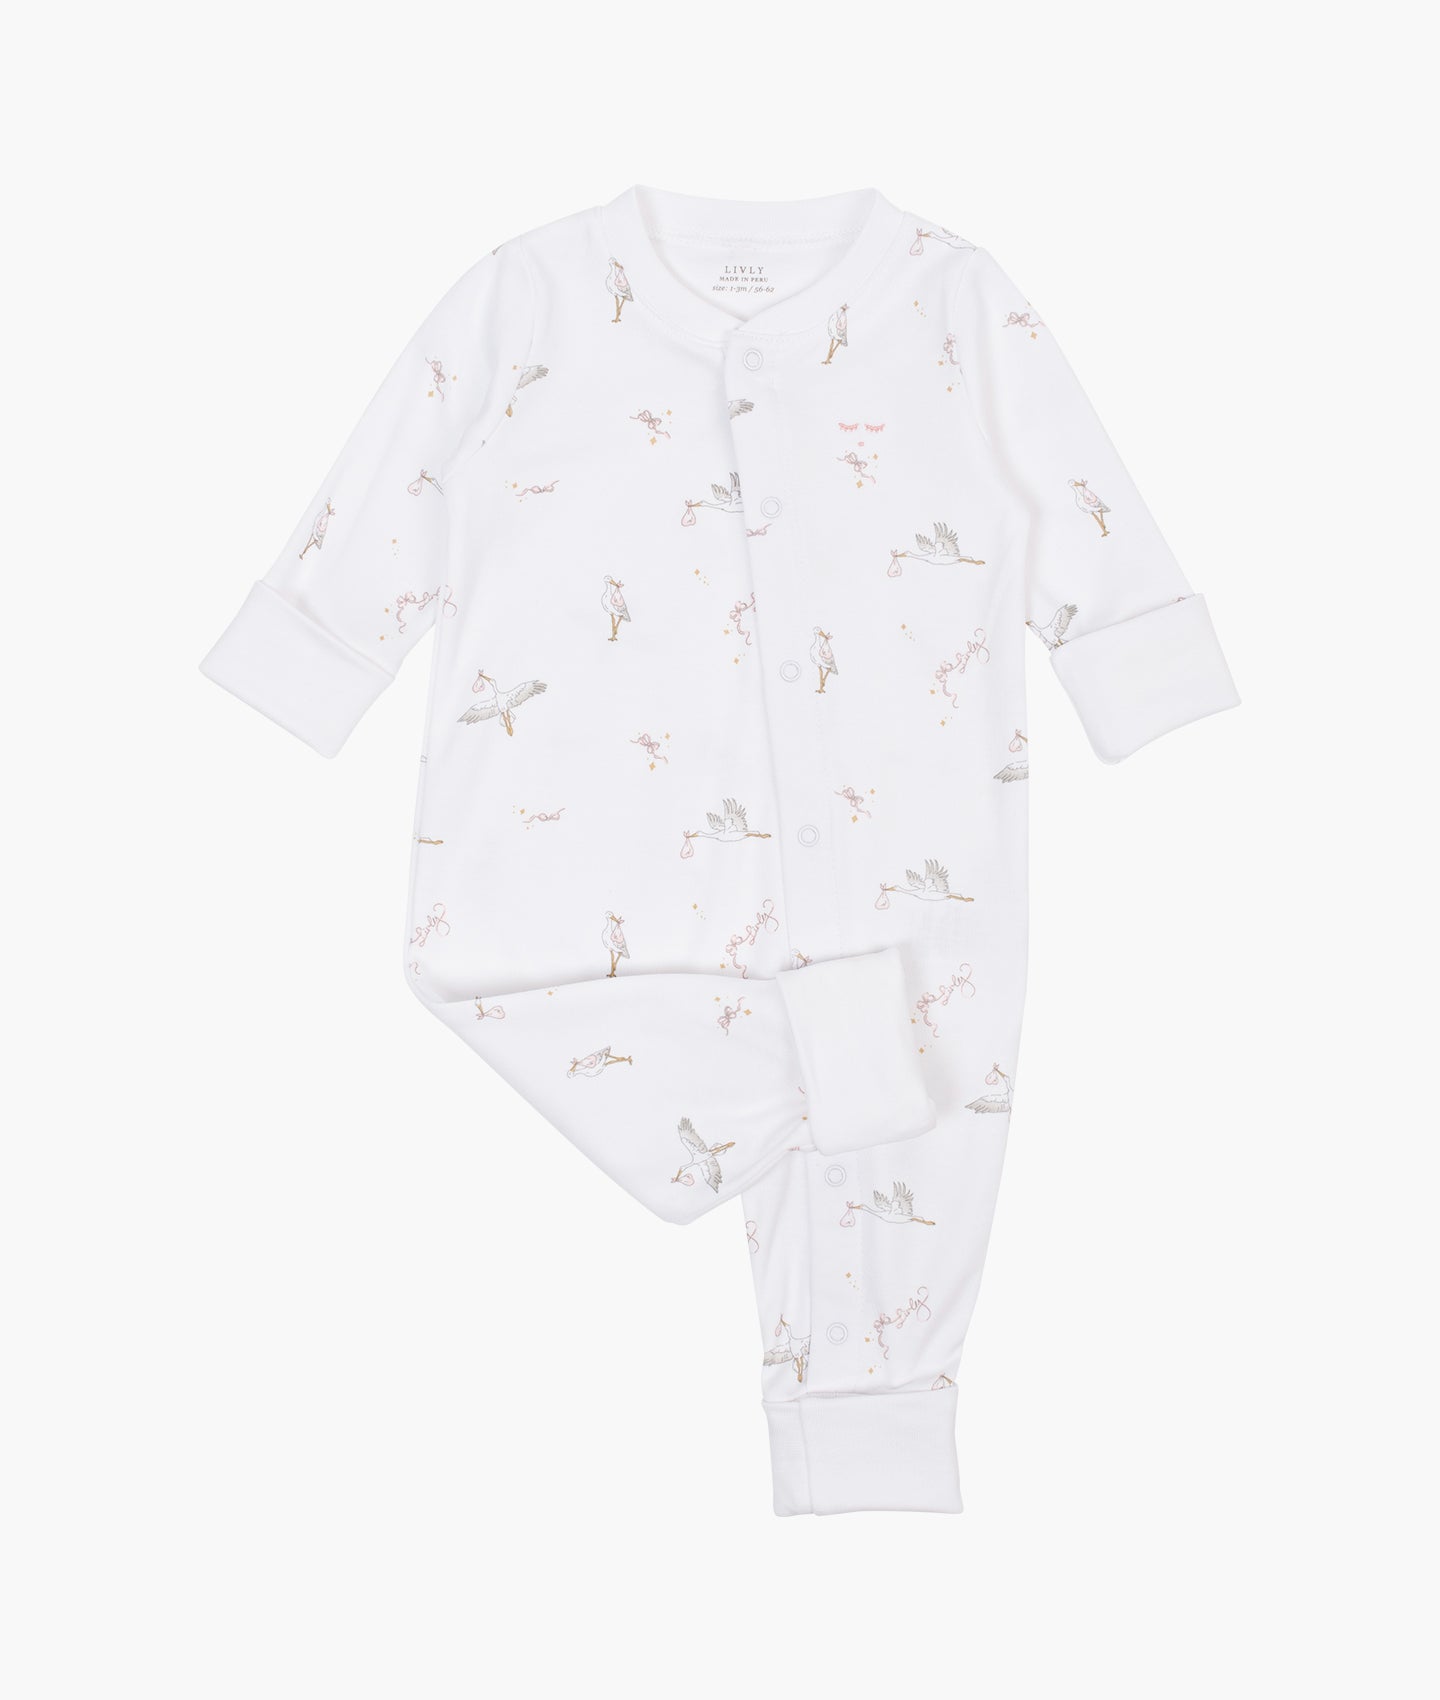 Storks Overall